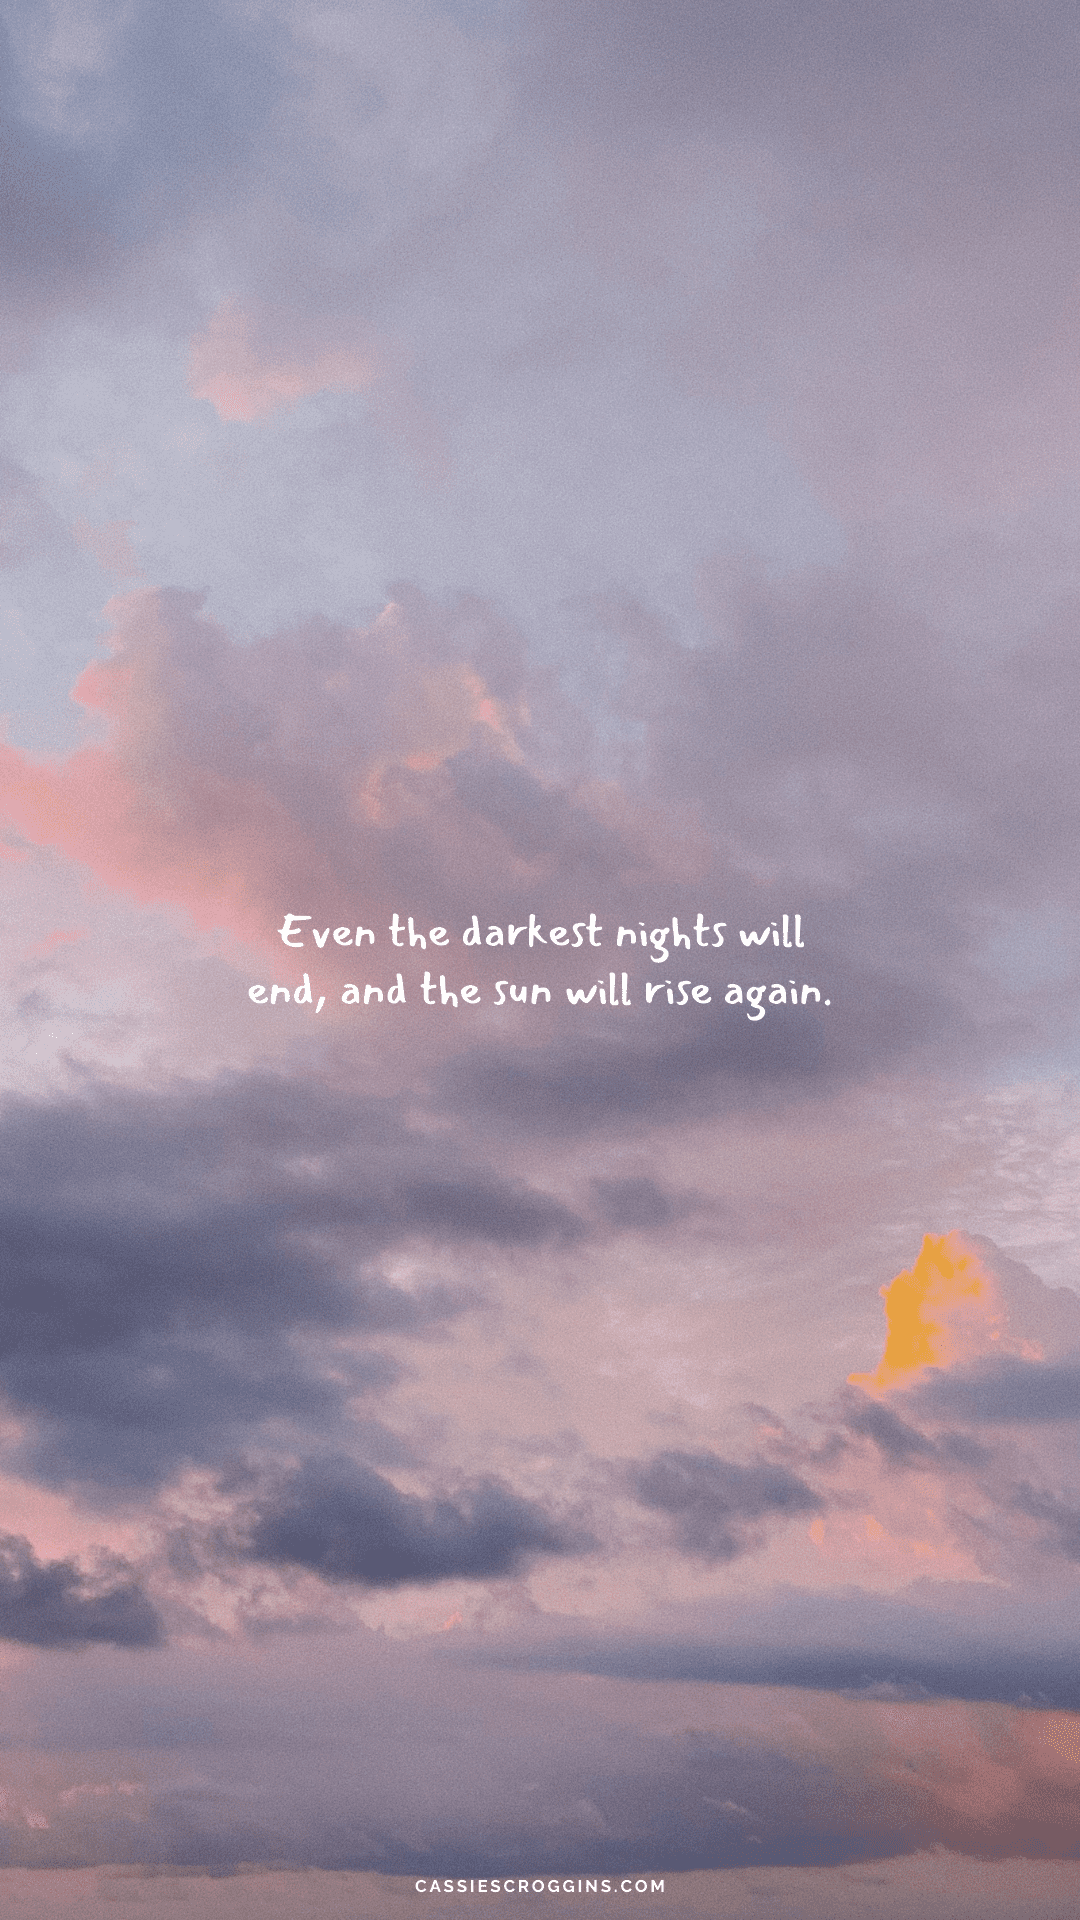 Even the darkest nights will end, and the sun will rise again. - Quotes